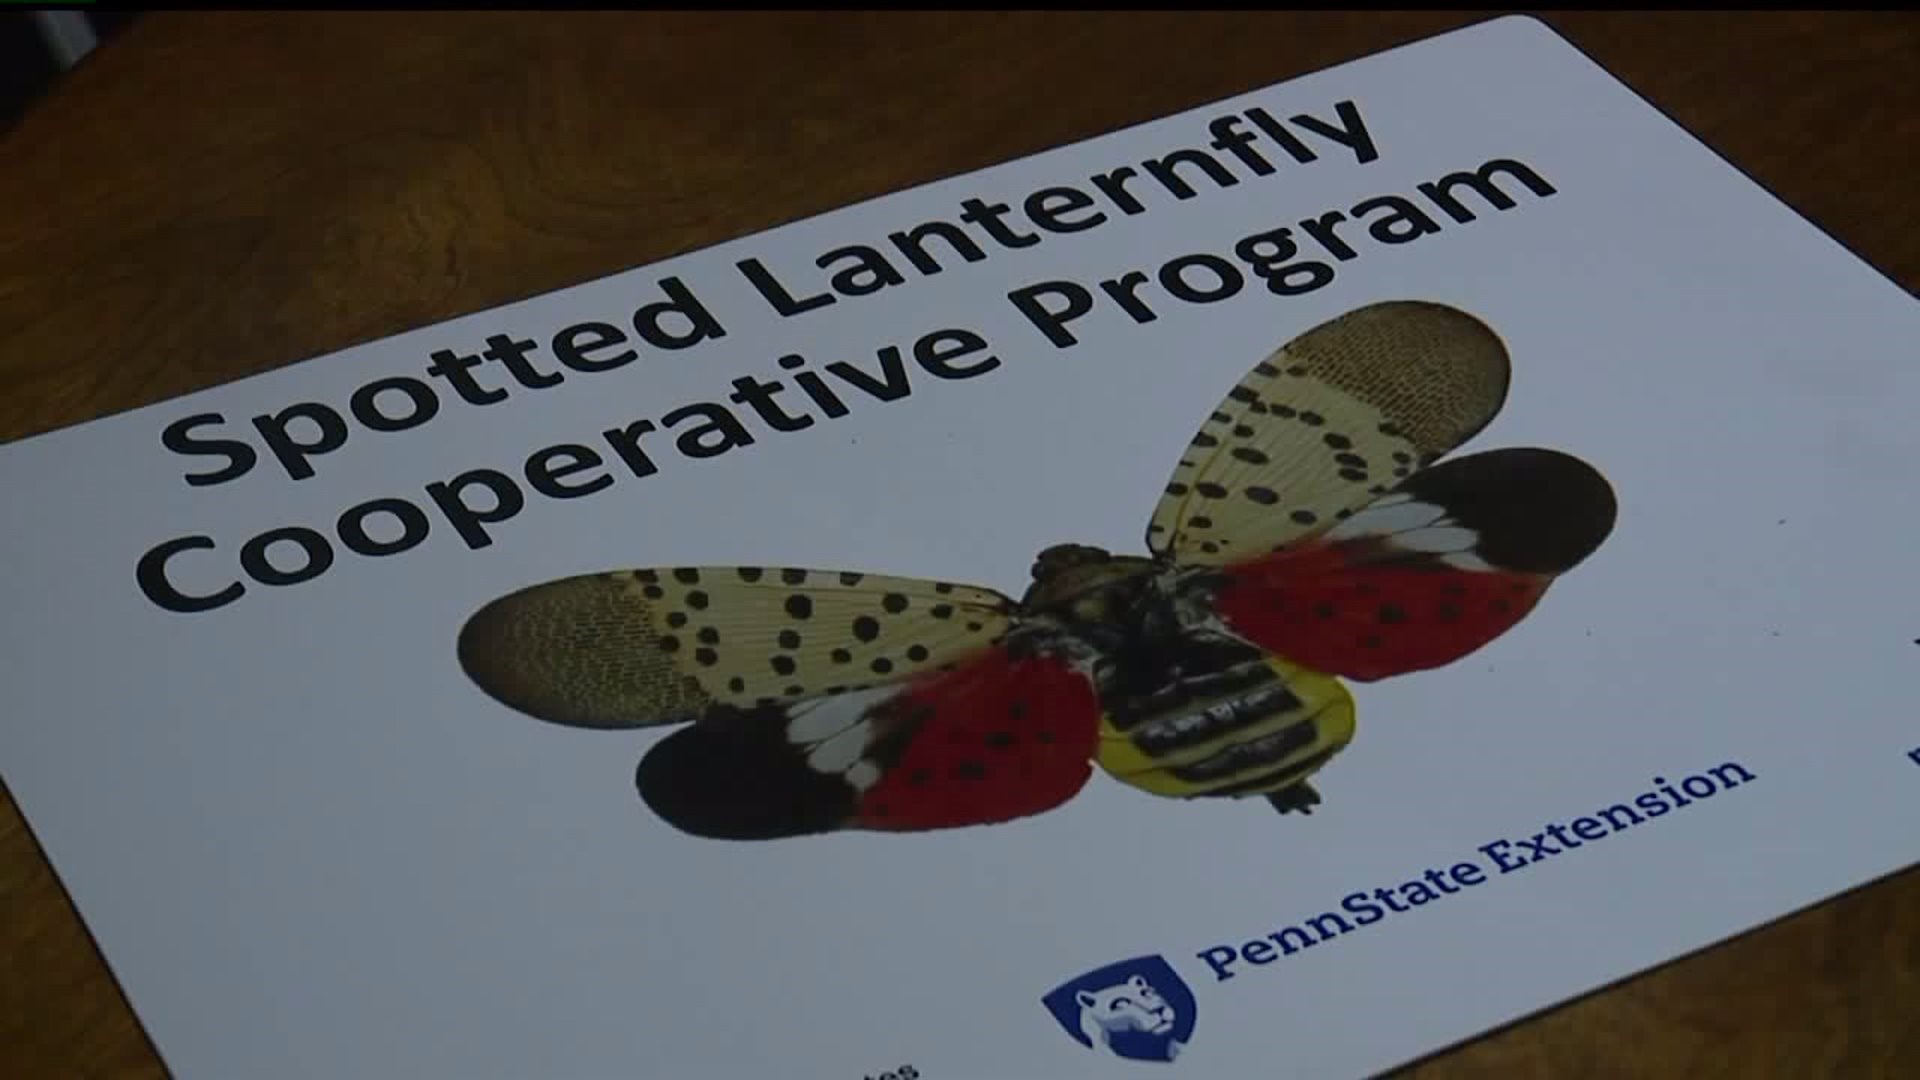 Tackling invasive west in PA like the `Spotted Laternfly"